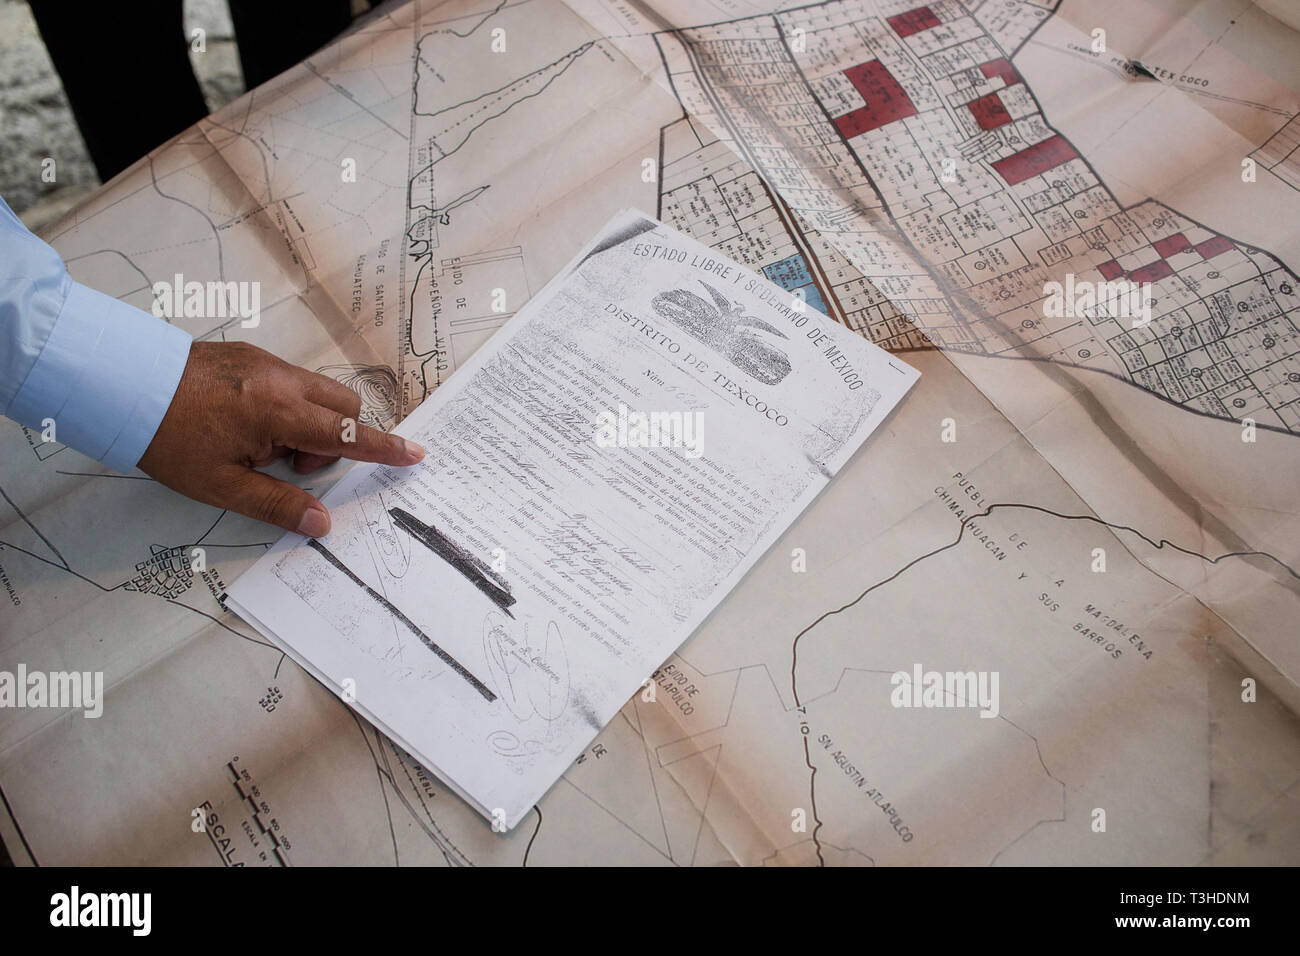 People explain documents that represent ownership of the land on the shores of Lake Texcoco, which they call ÒTlatelesÓ, that the Mexican Federal Government wants to use for the new Mexico City Airport project in the community of Chimalhuac‡n, the State of Mexico, Mexico, August 25, 2017. Mexico's newly elected president Andreas Lopez Manuel Obrador canceled this project in the fall of 2018, while it was in the middle of construction. The airport was set to replace the aging Benito Juarez International Airport. Stock Photo